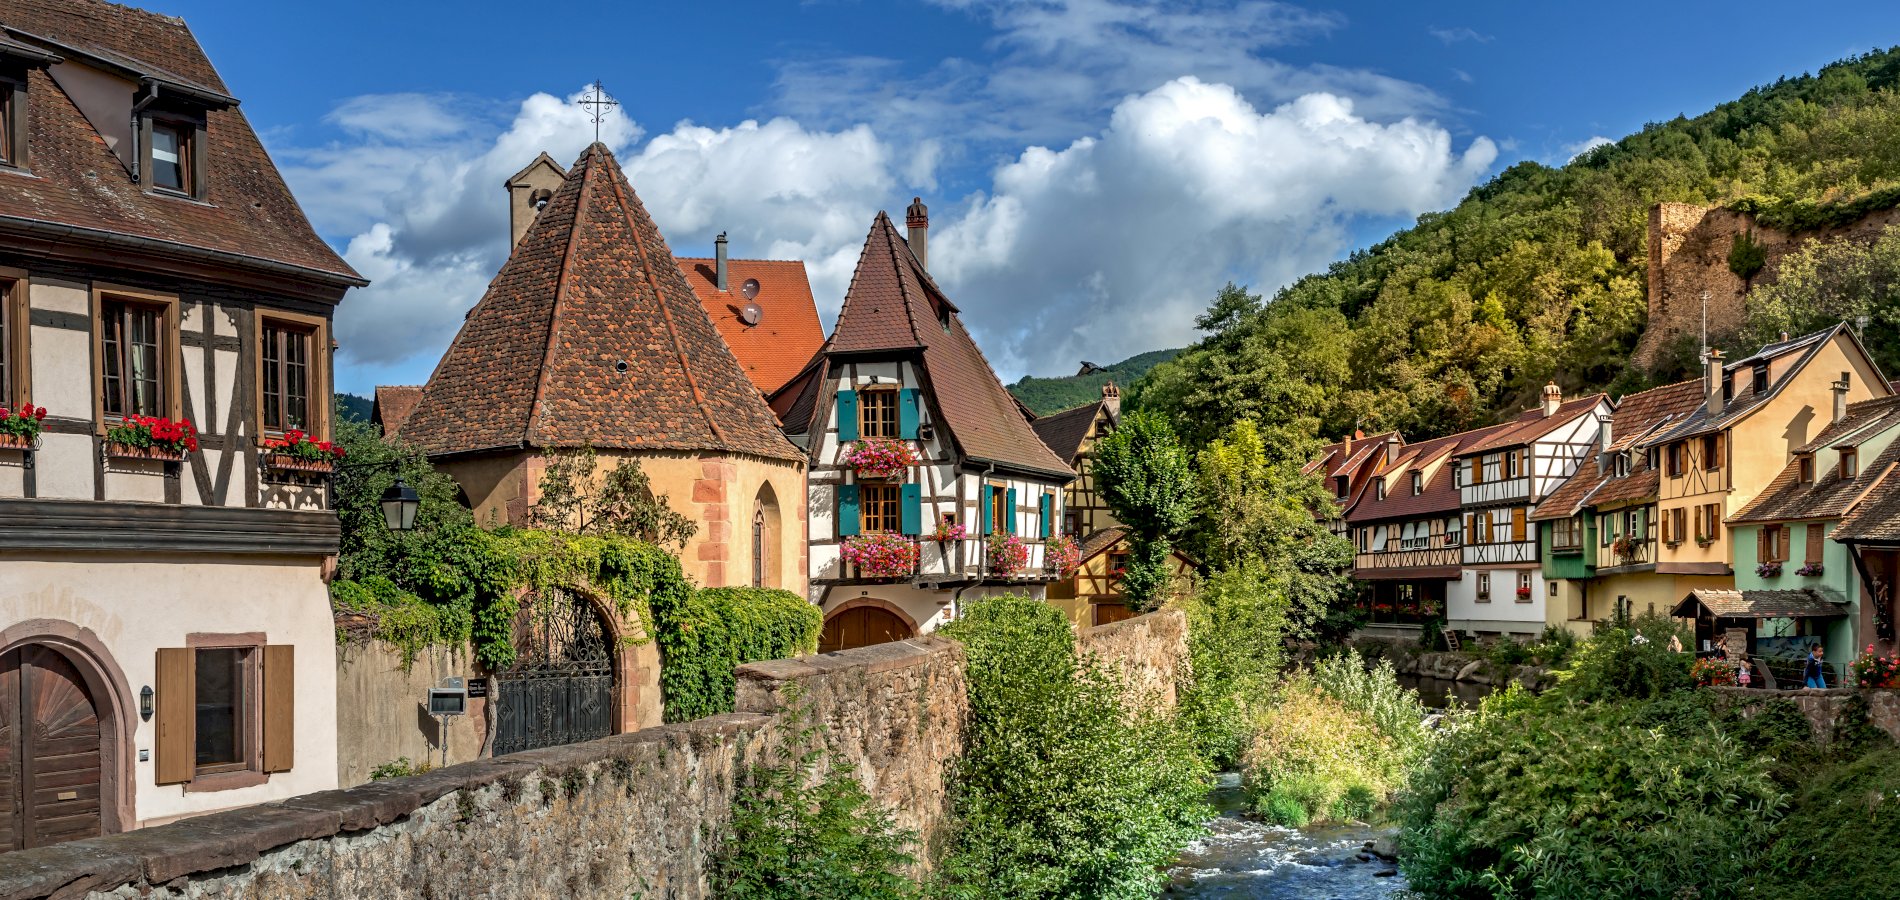 Ophorus Tours - From Colmar to visit Alsace Breweries & Taste local Delicacies tour private